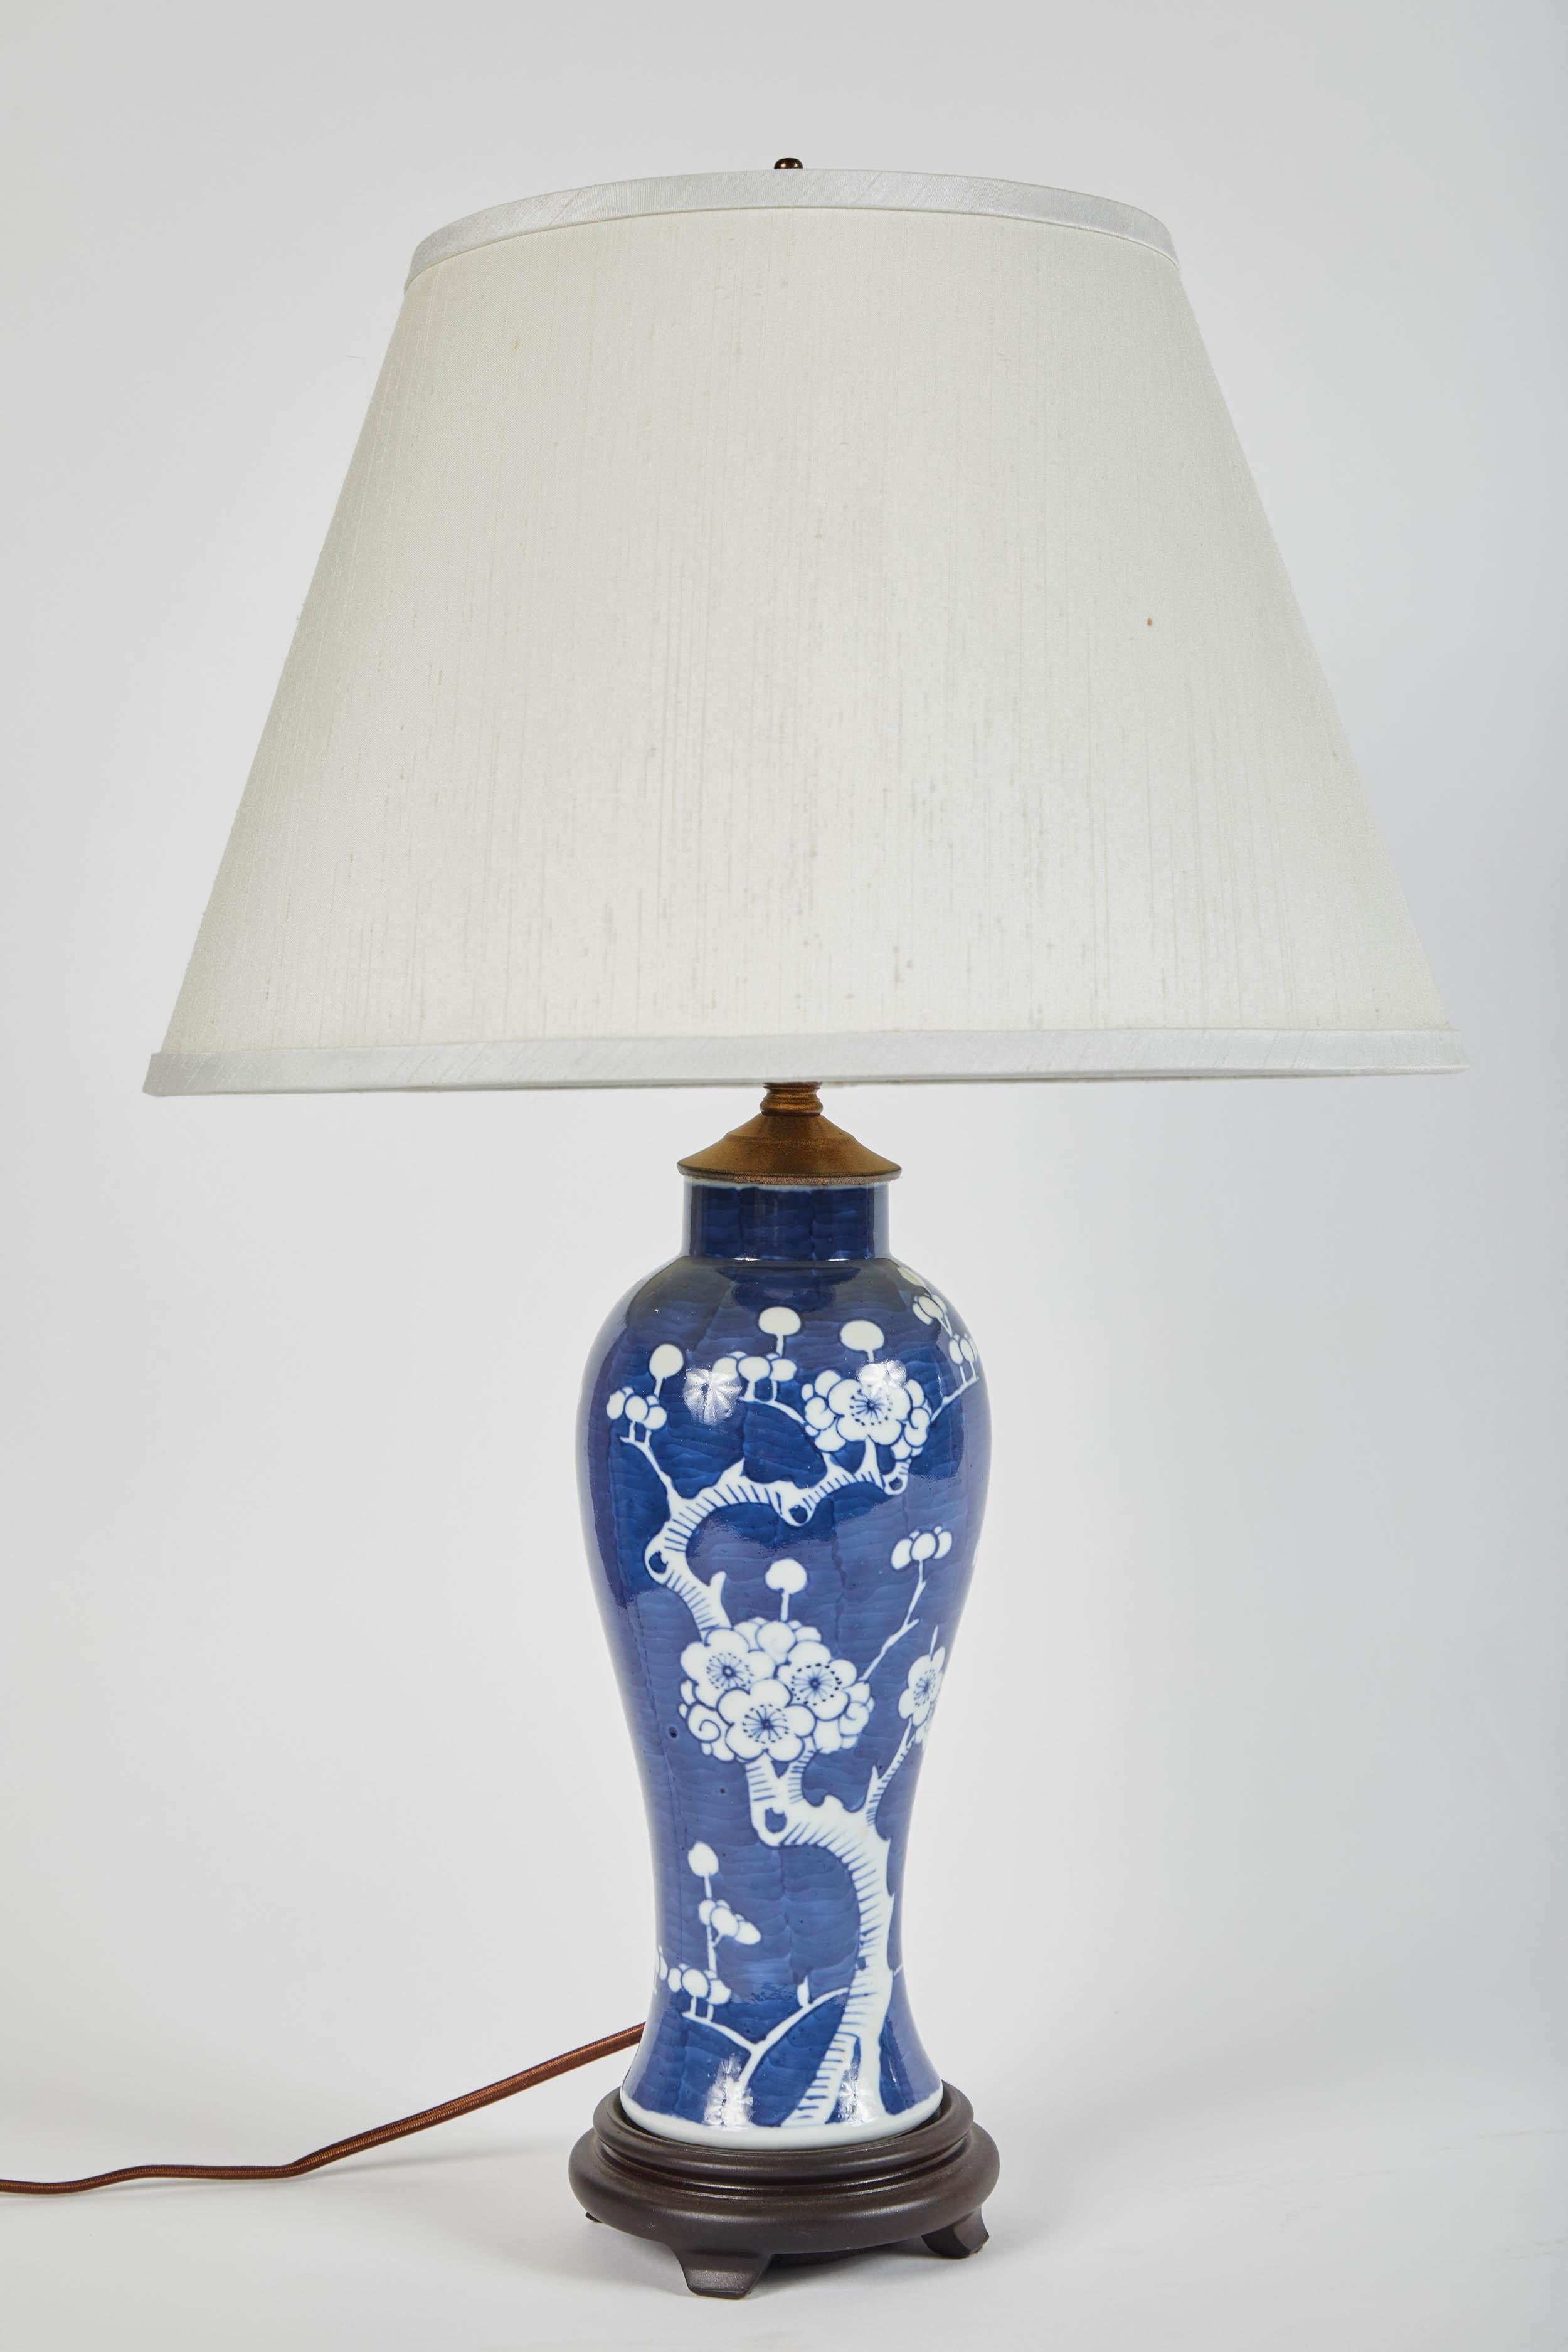 A pair of 20th century blue and white vases featuring cherry blossom motif. Turned into electrified table lamps with ivory shades.